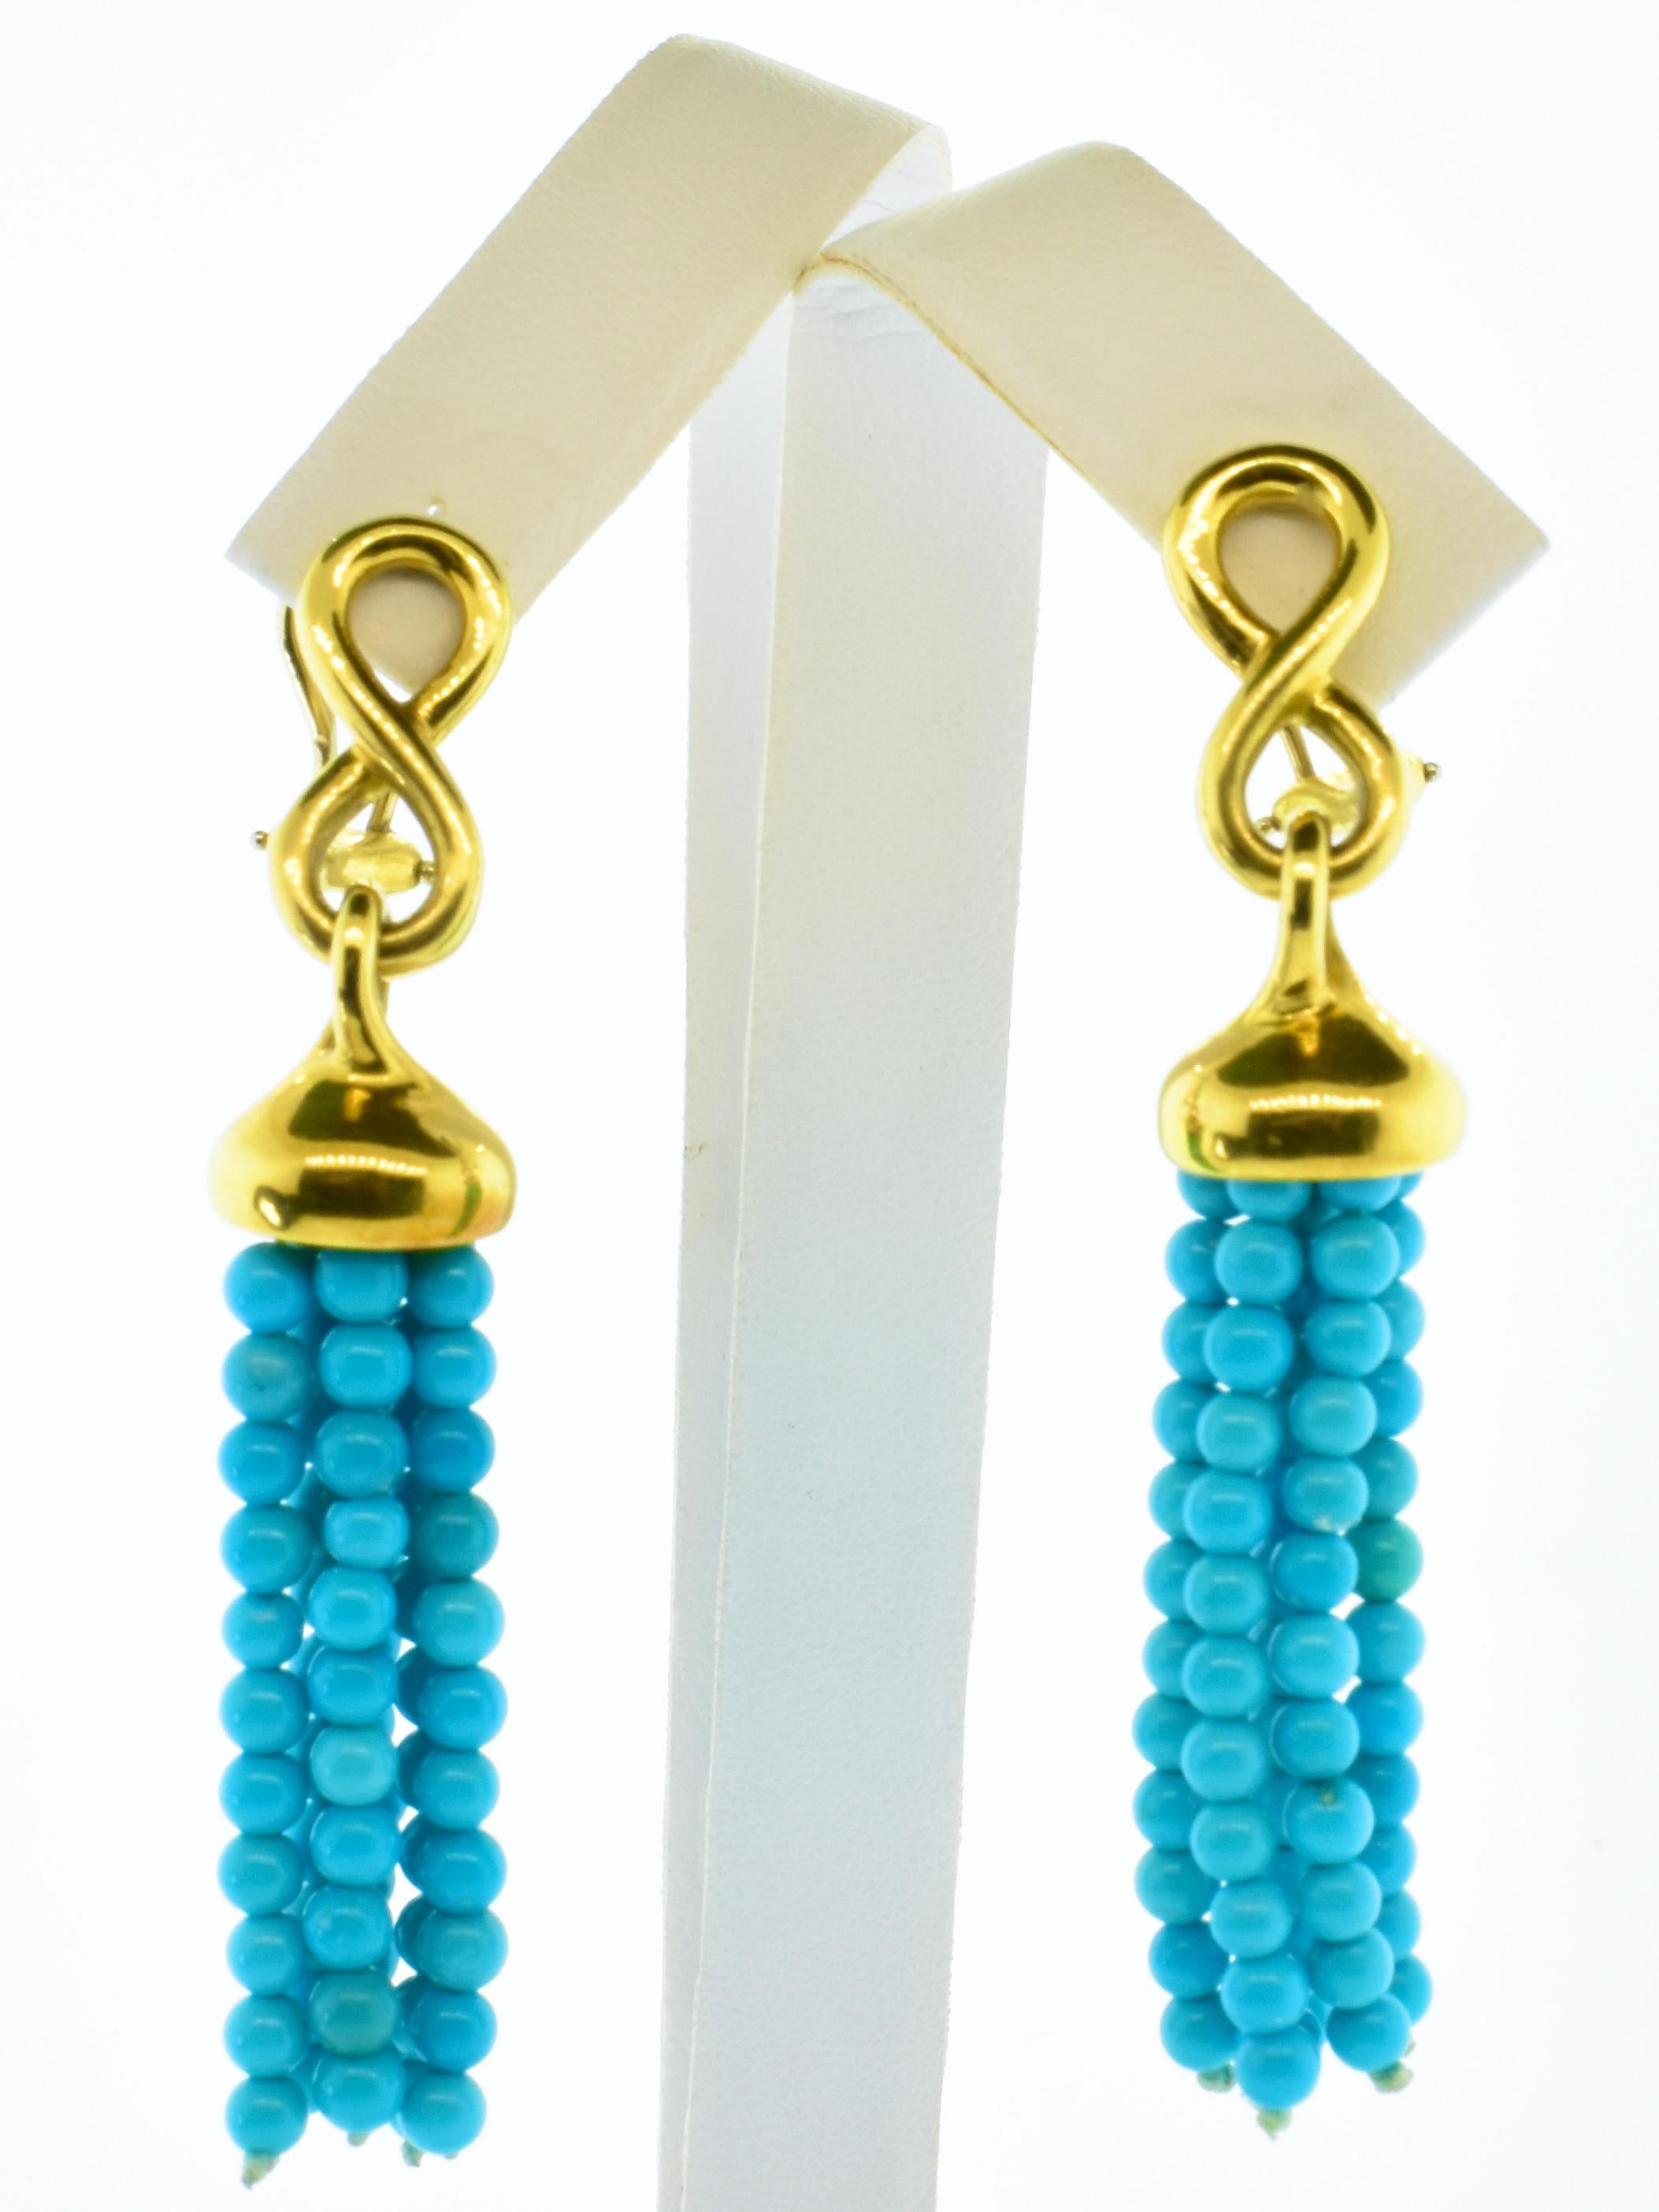 Contemporary Angela Cummings 18K and Turquoise Finely Made Earrings, c. 1990 For Sale